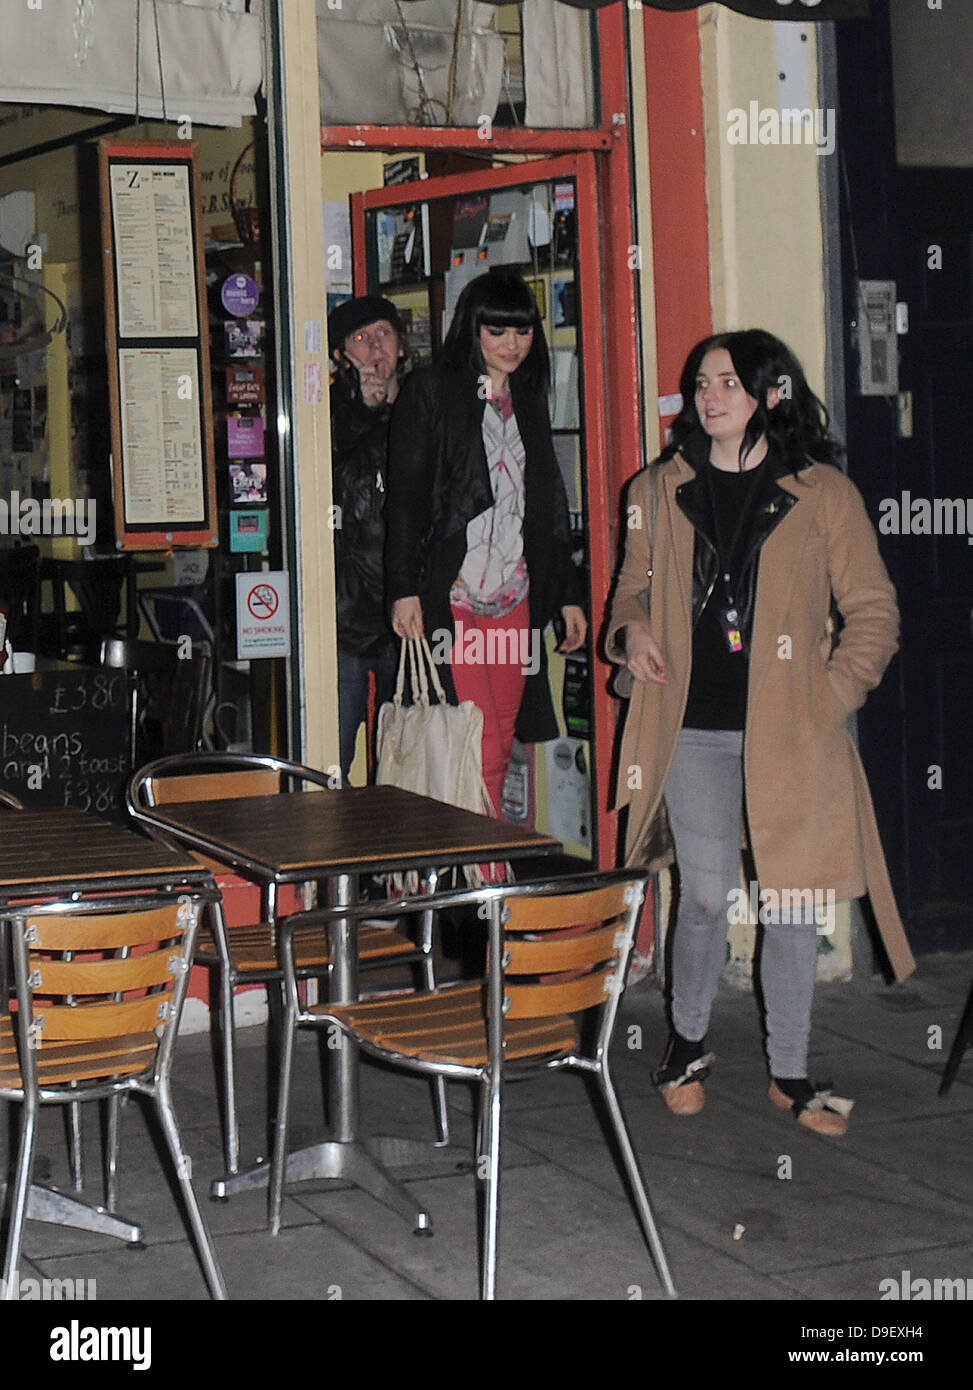 Jessica Cornish, aka Jessie J, takes some time out of her hectic day promoting her new album to enjoy an evening meal with friends. With her recent chart success and list of awards and nominations, she could be forgiven for eating out at a typical expensive West End restaurant like most celebrities - but Jessie however opted for the rather low key Cafe Z Bar in Stoke Newington, where a typical main meal costs around £4! Jessie was quizzed by snappers when she left as to what she had for dinner, to which she replied 'a bit of everything'. London, England - 22.02.11 Stock Photo